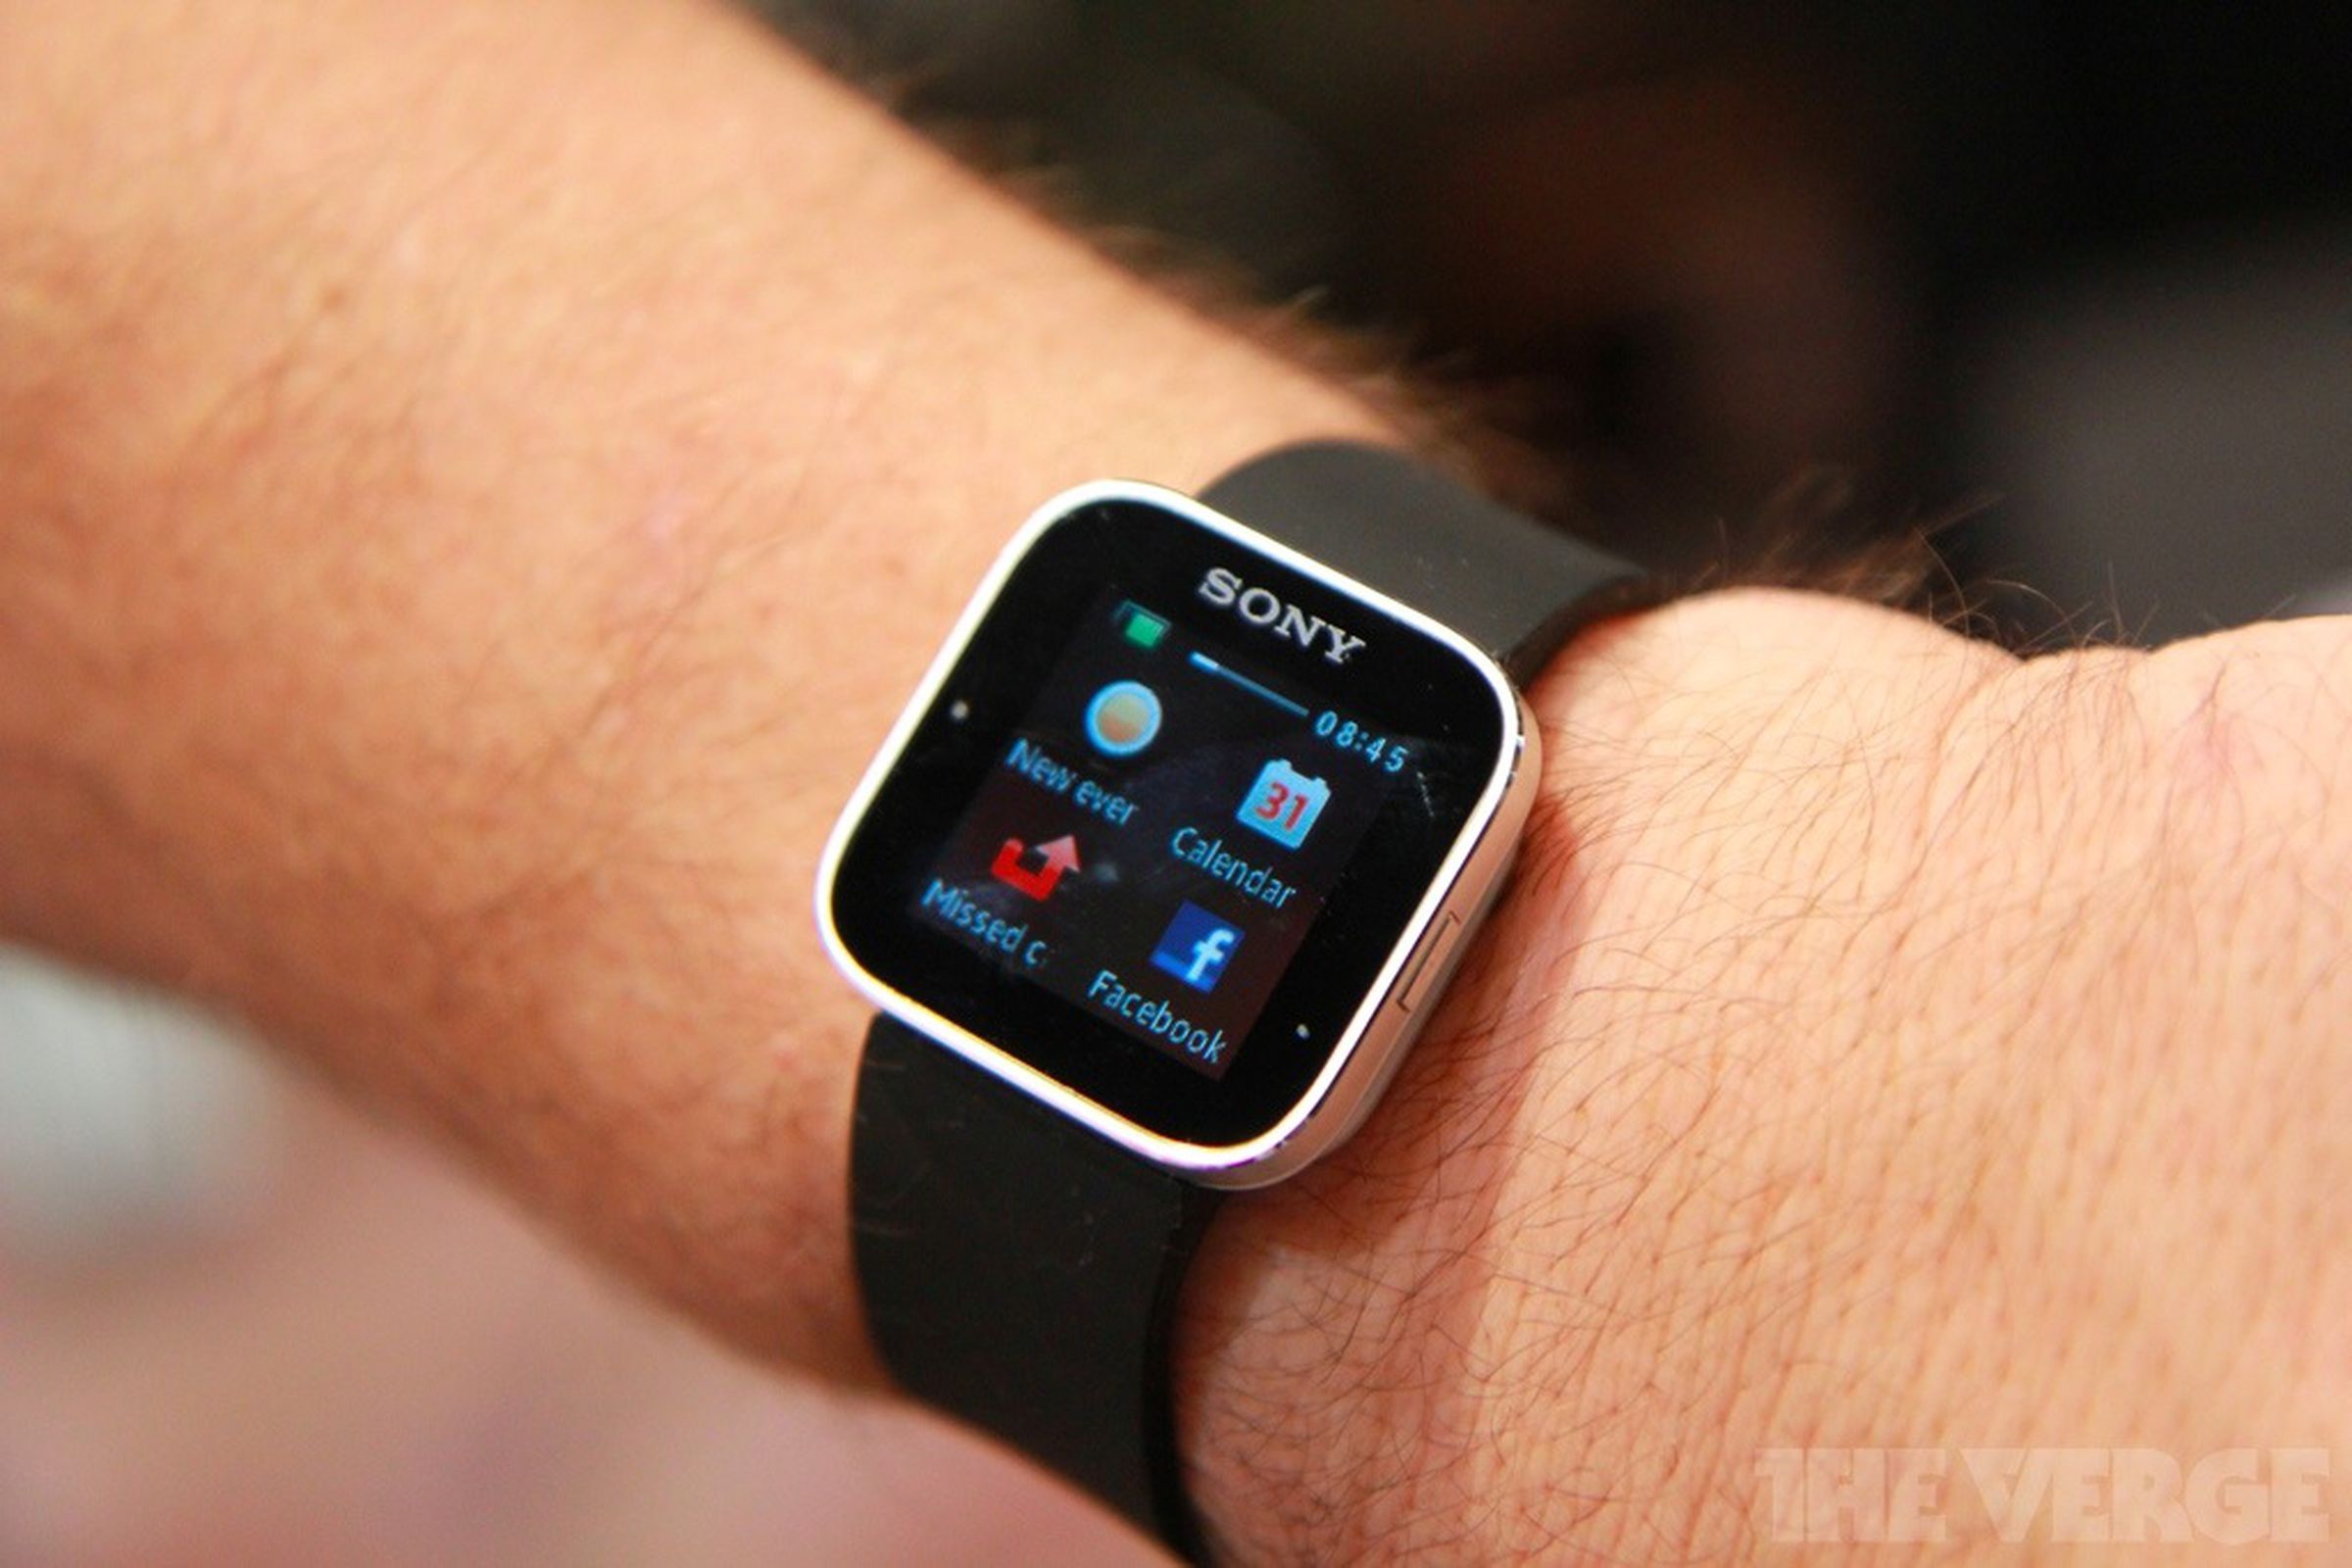 Gallery Photo: Sony Smart Watch (aka Sony Ericsson LiveView 2) hands-on pictures